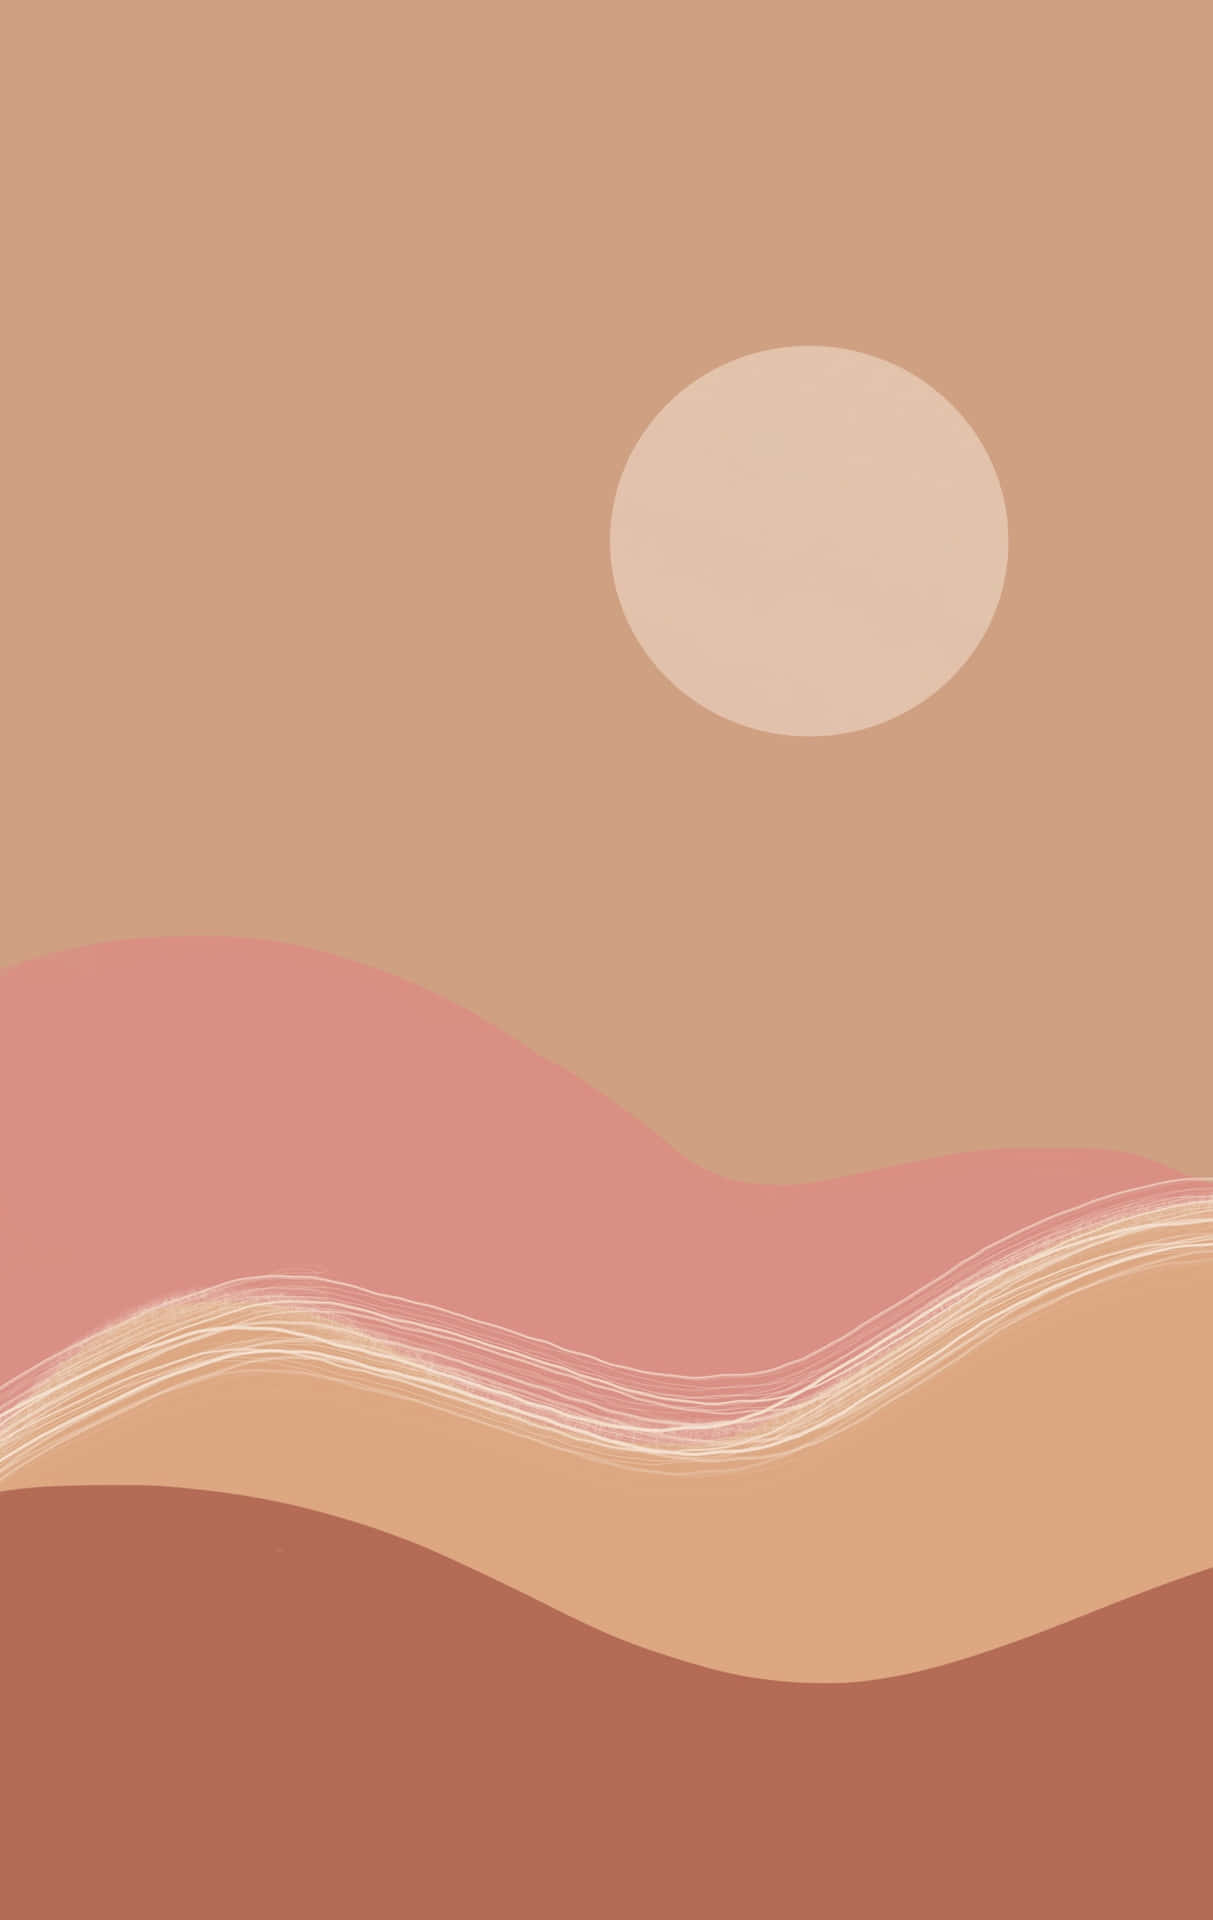 A Desert Landscape With A Sun And A Pink Sky